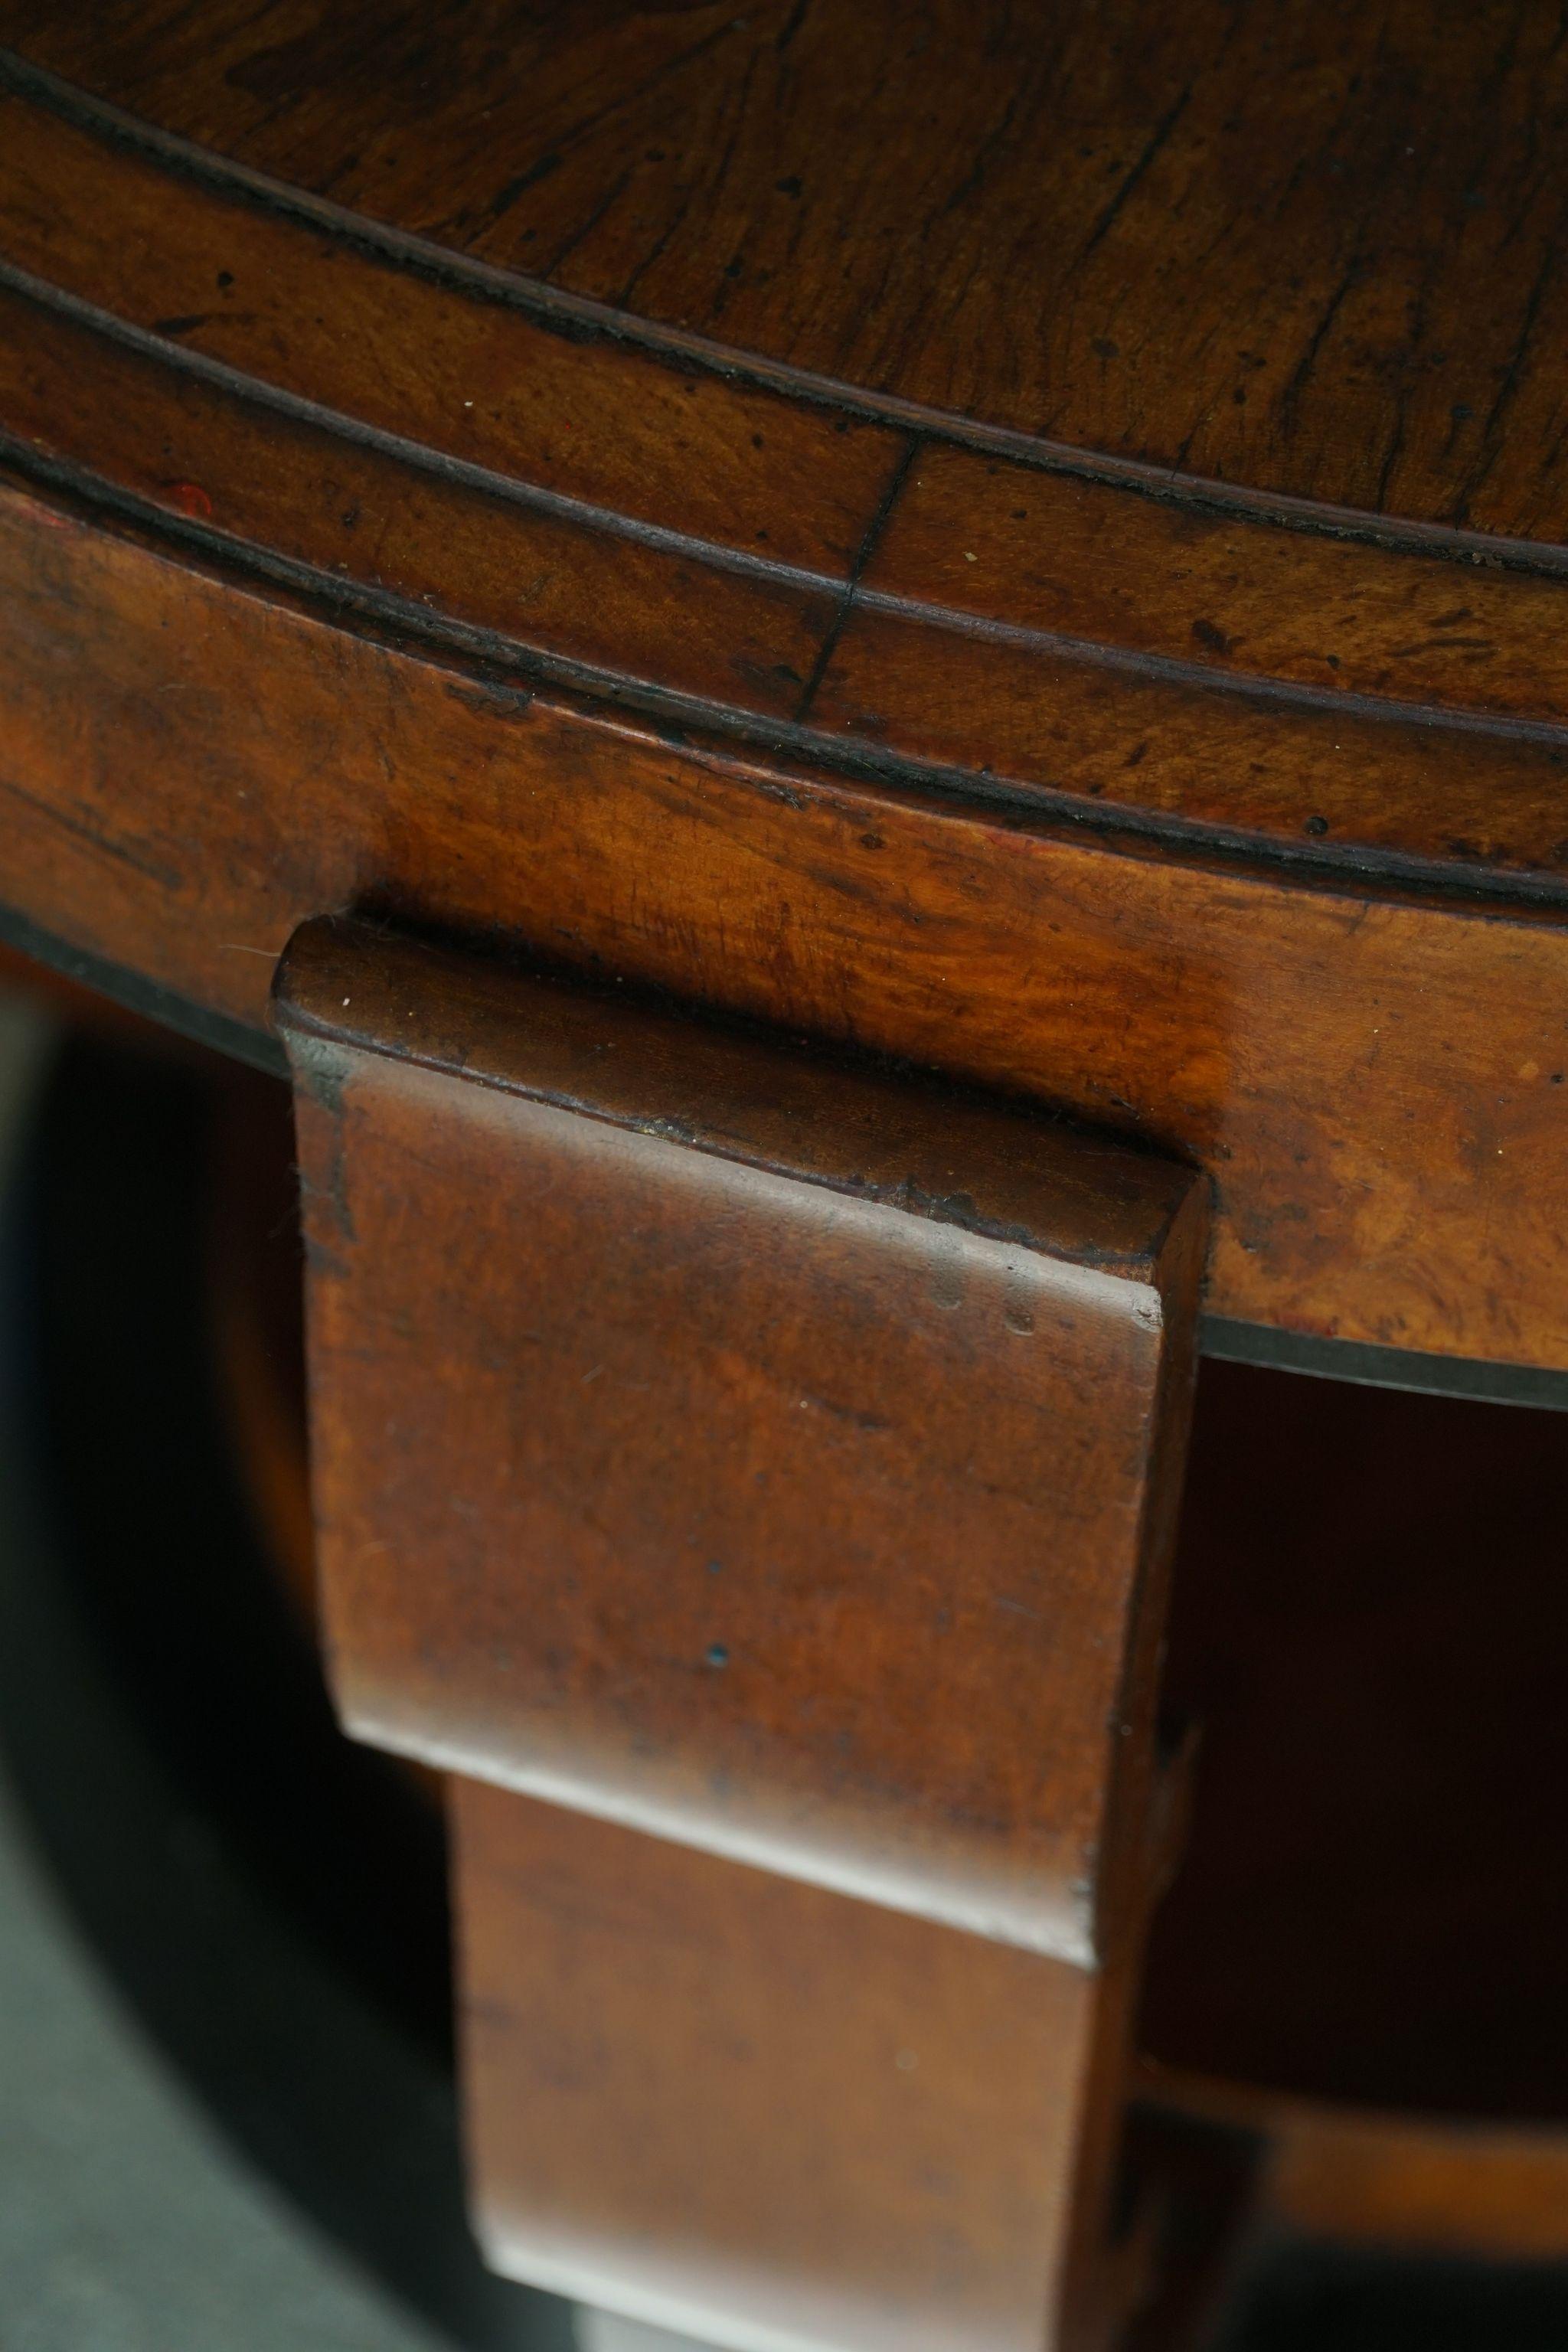 Art Deco, Large Round Sofa Table in Walnut, By a Danish Cabinetmaker, 1930s For Sale 8